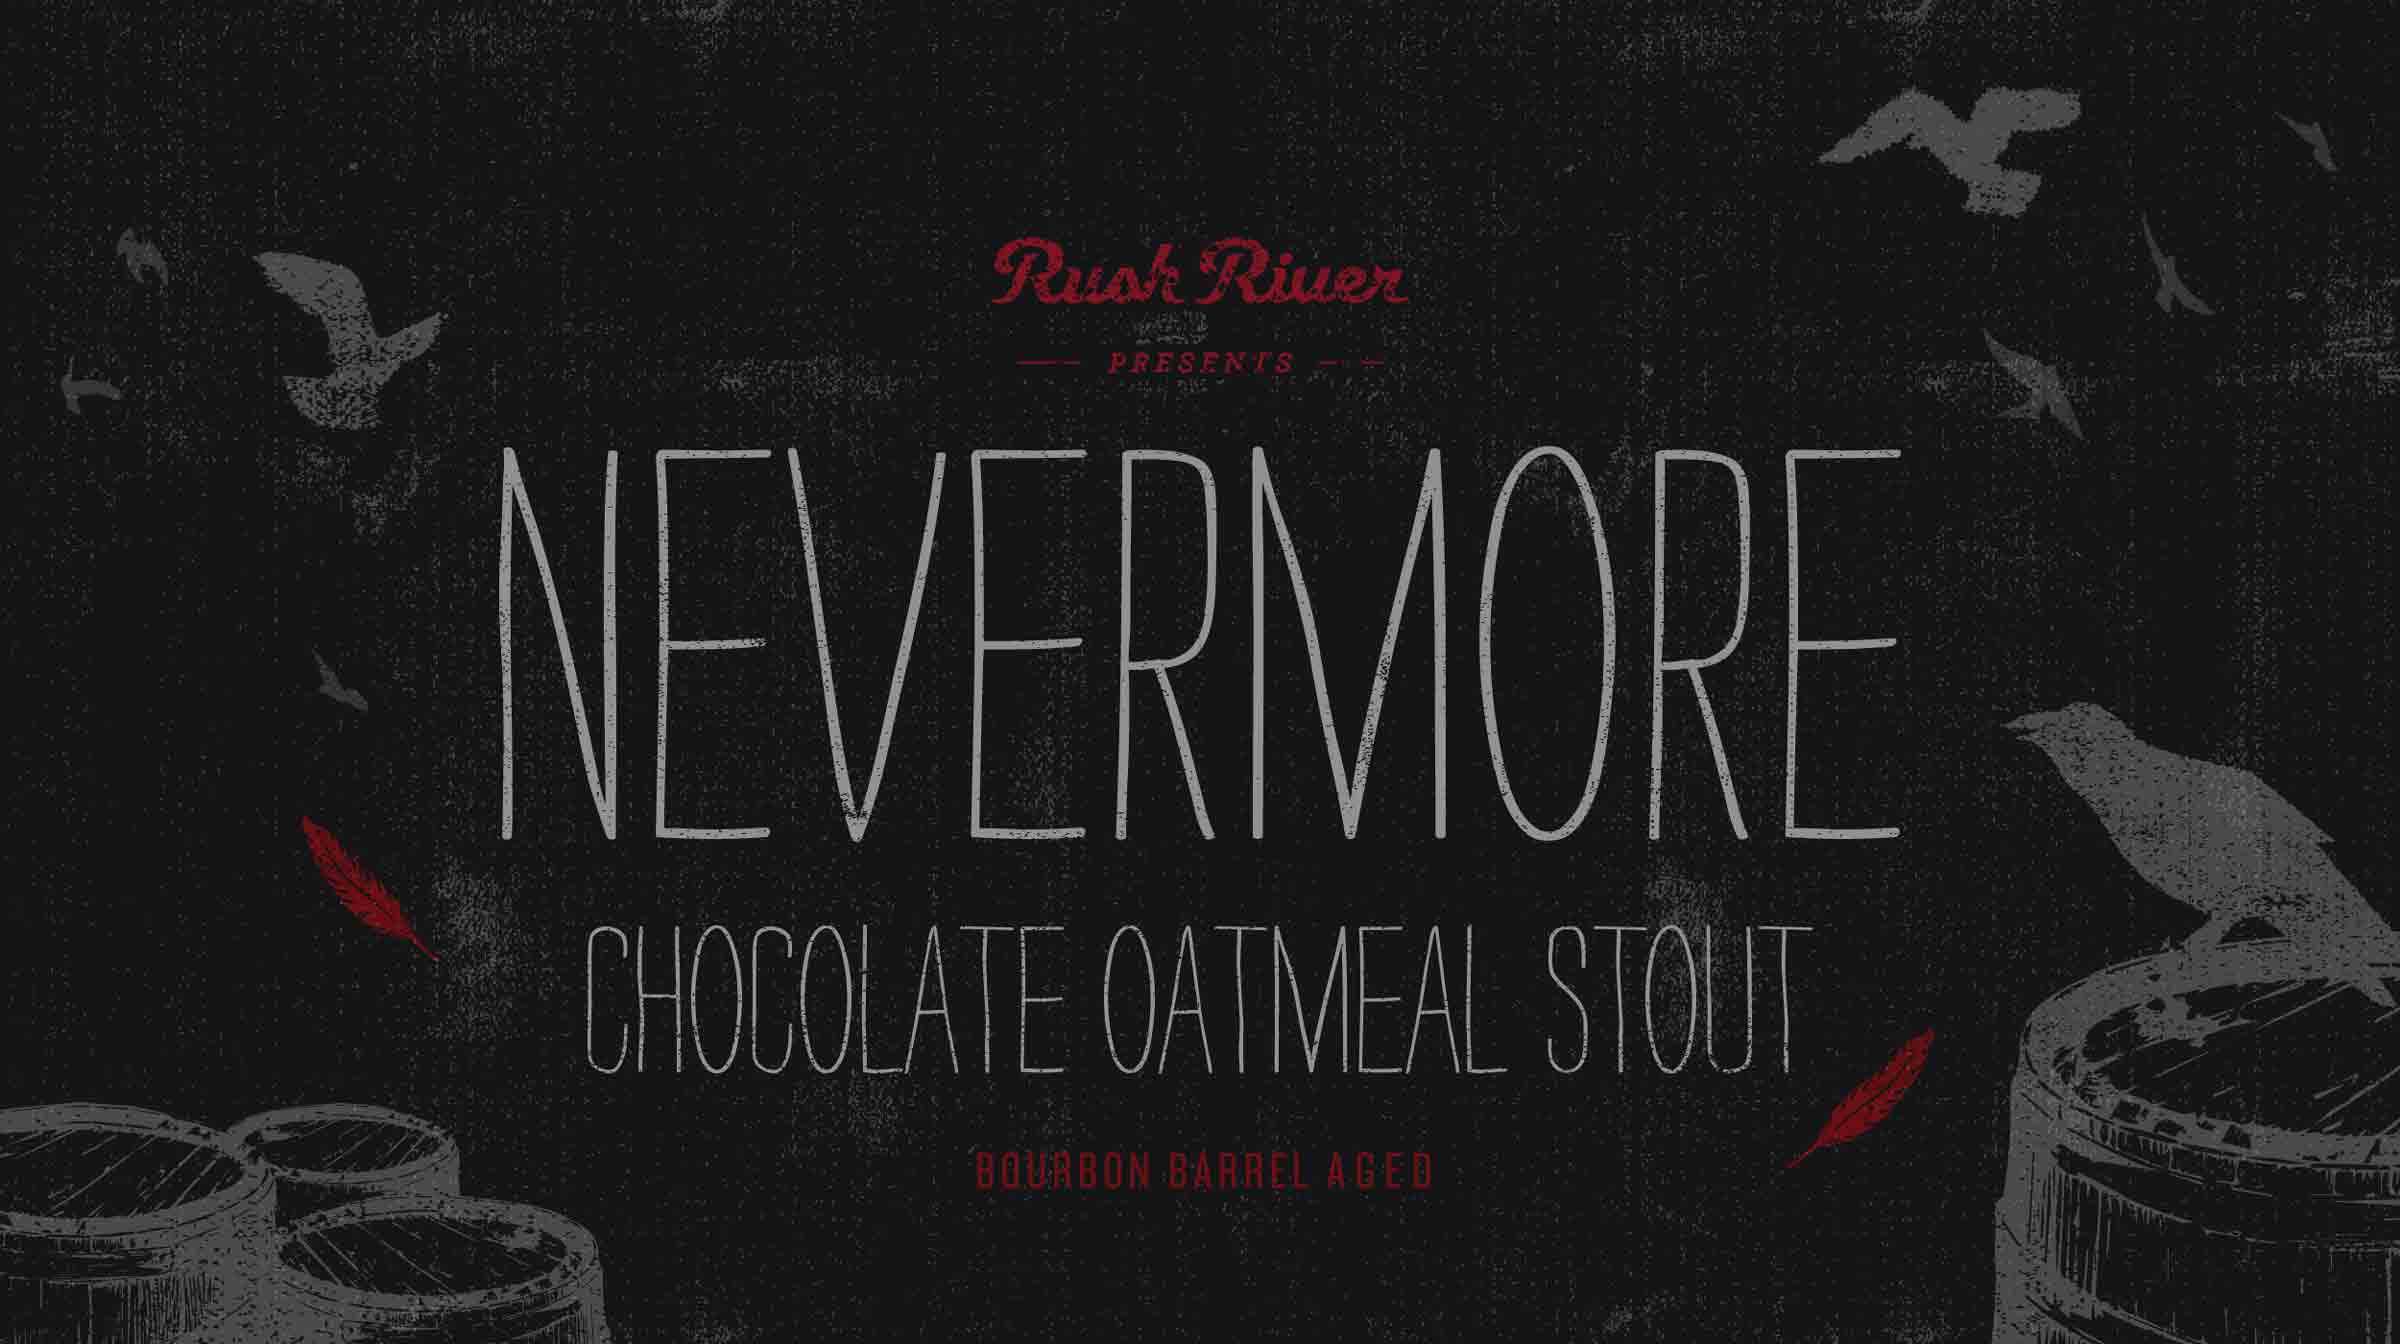 Nevermore Chocolate Oatmeal Stout